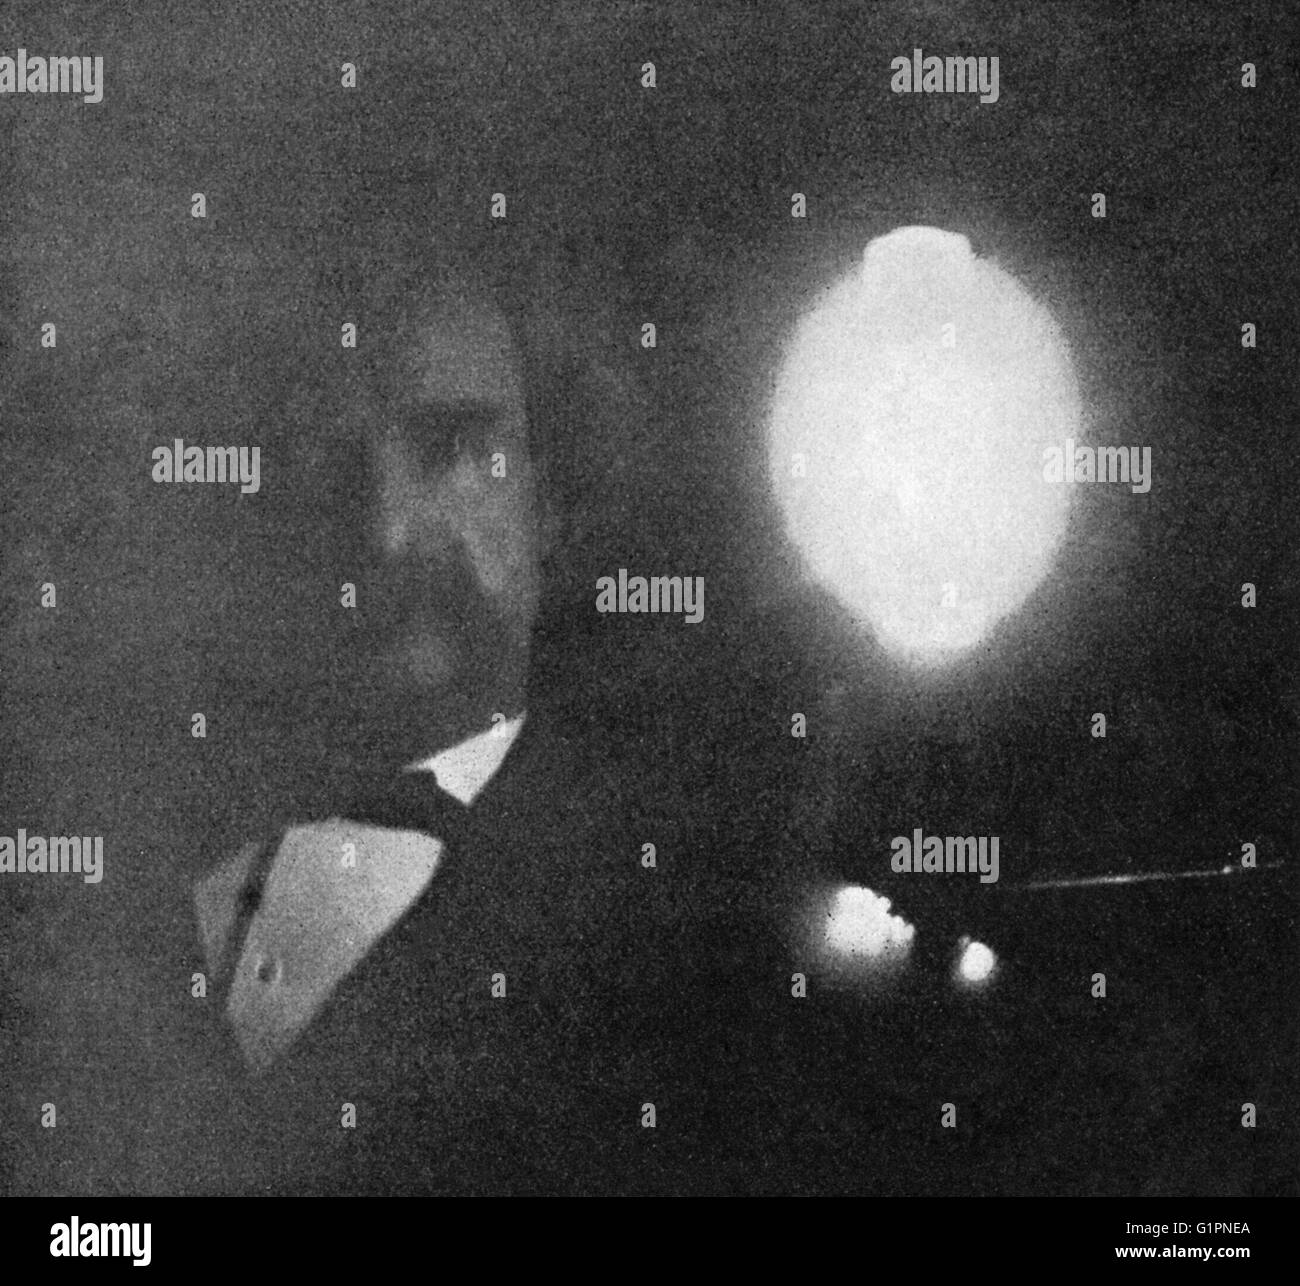 MARK TWAIN (1835-1910). Samuel Clemens. American writer and humorist. Photographed by phosphorescent light in Nikola Tesla's laboratory; the exposure time was ten minutes. Photograph, January 1894. Stock Photo